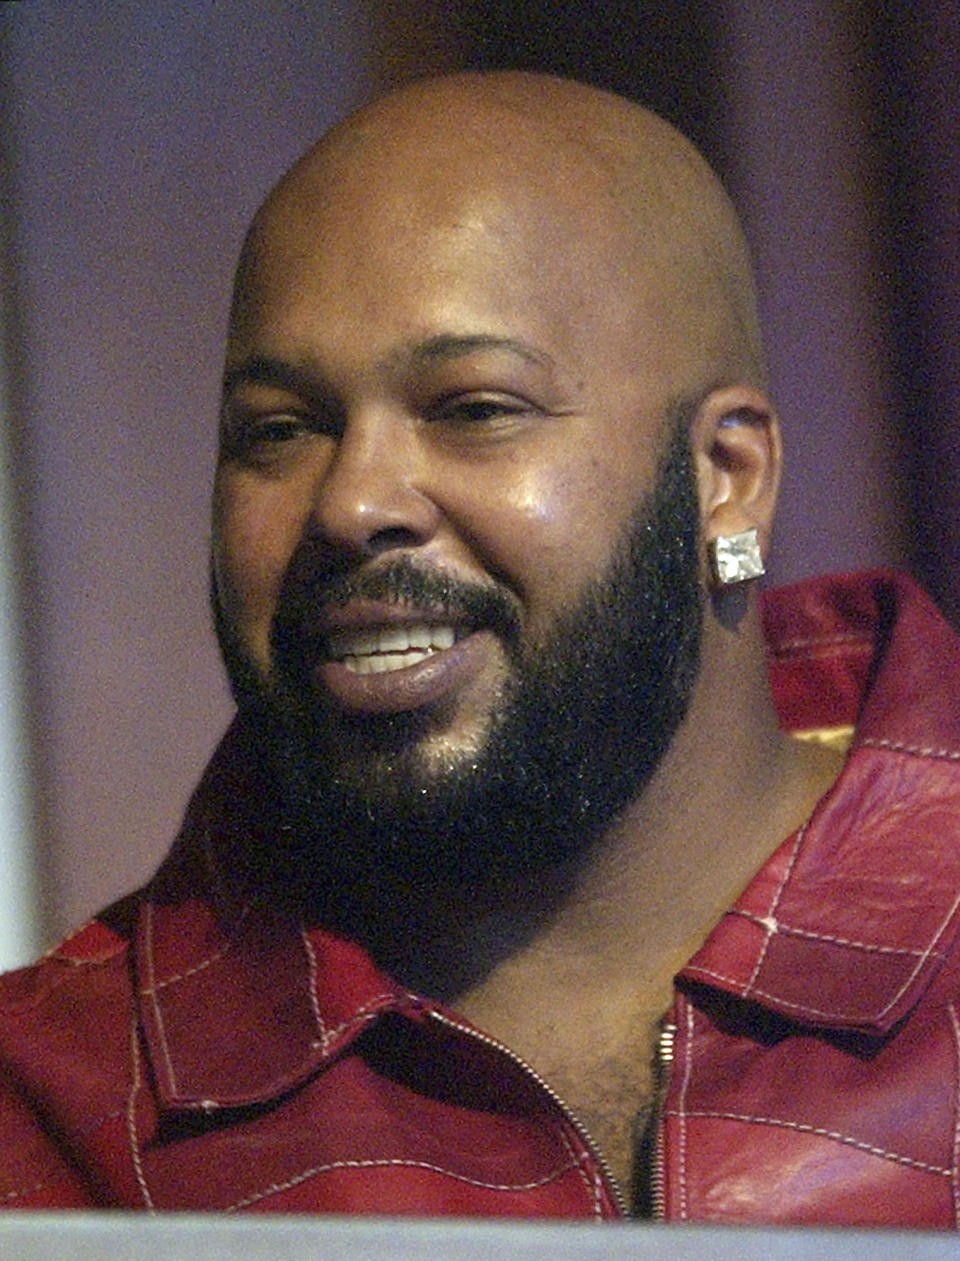 FILE - Rap producer Marion "Suge" Knight watches the 3rd annual BET Awards in the Hollywood section of Los Angeles, June 24, 2003. Knight was driving the BMW that was transporting rapper Tupac Shakur the night Shakur was shot in 1996. (AP Photo/Kevork Djansezian, File)